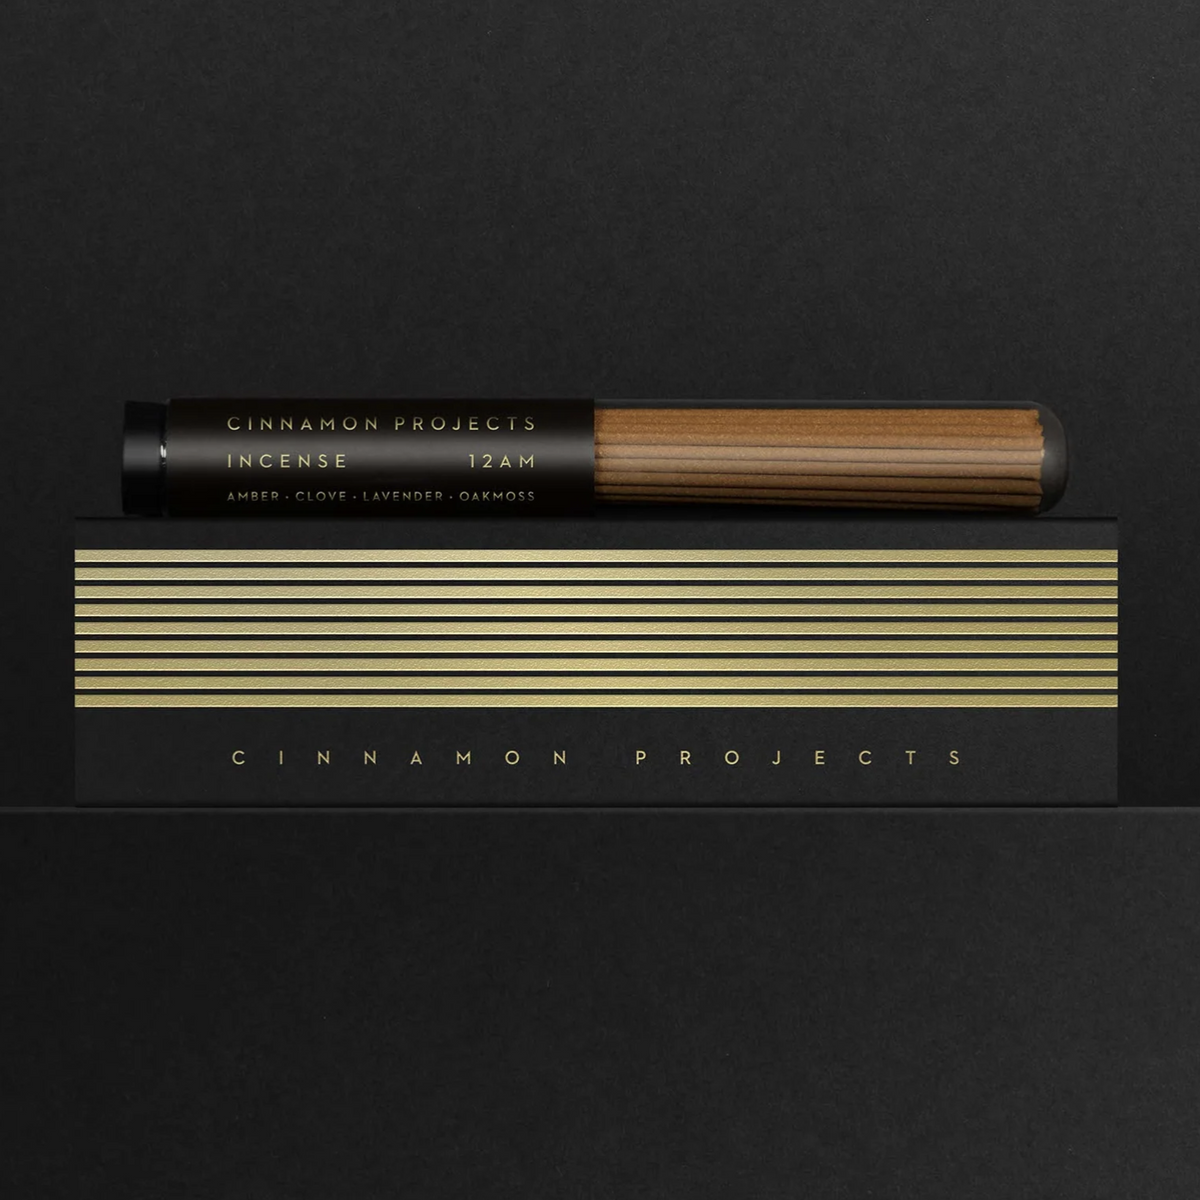 12am Incense by Cinnamon Projects